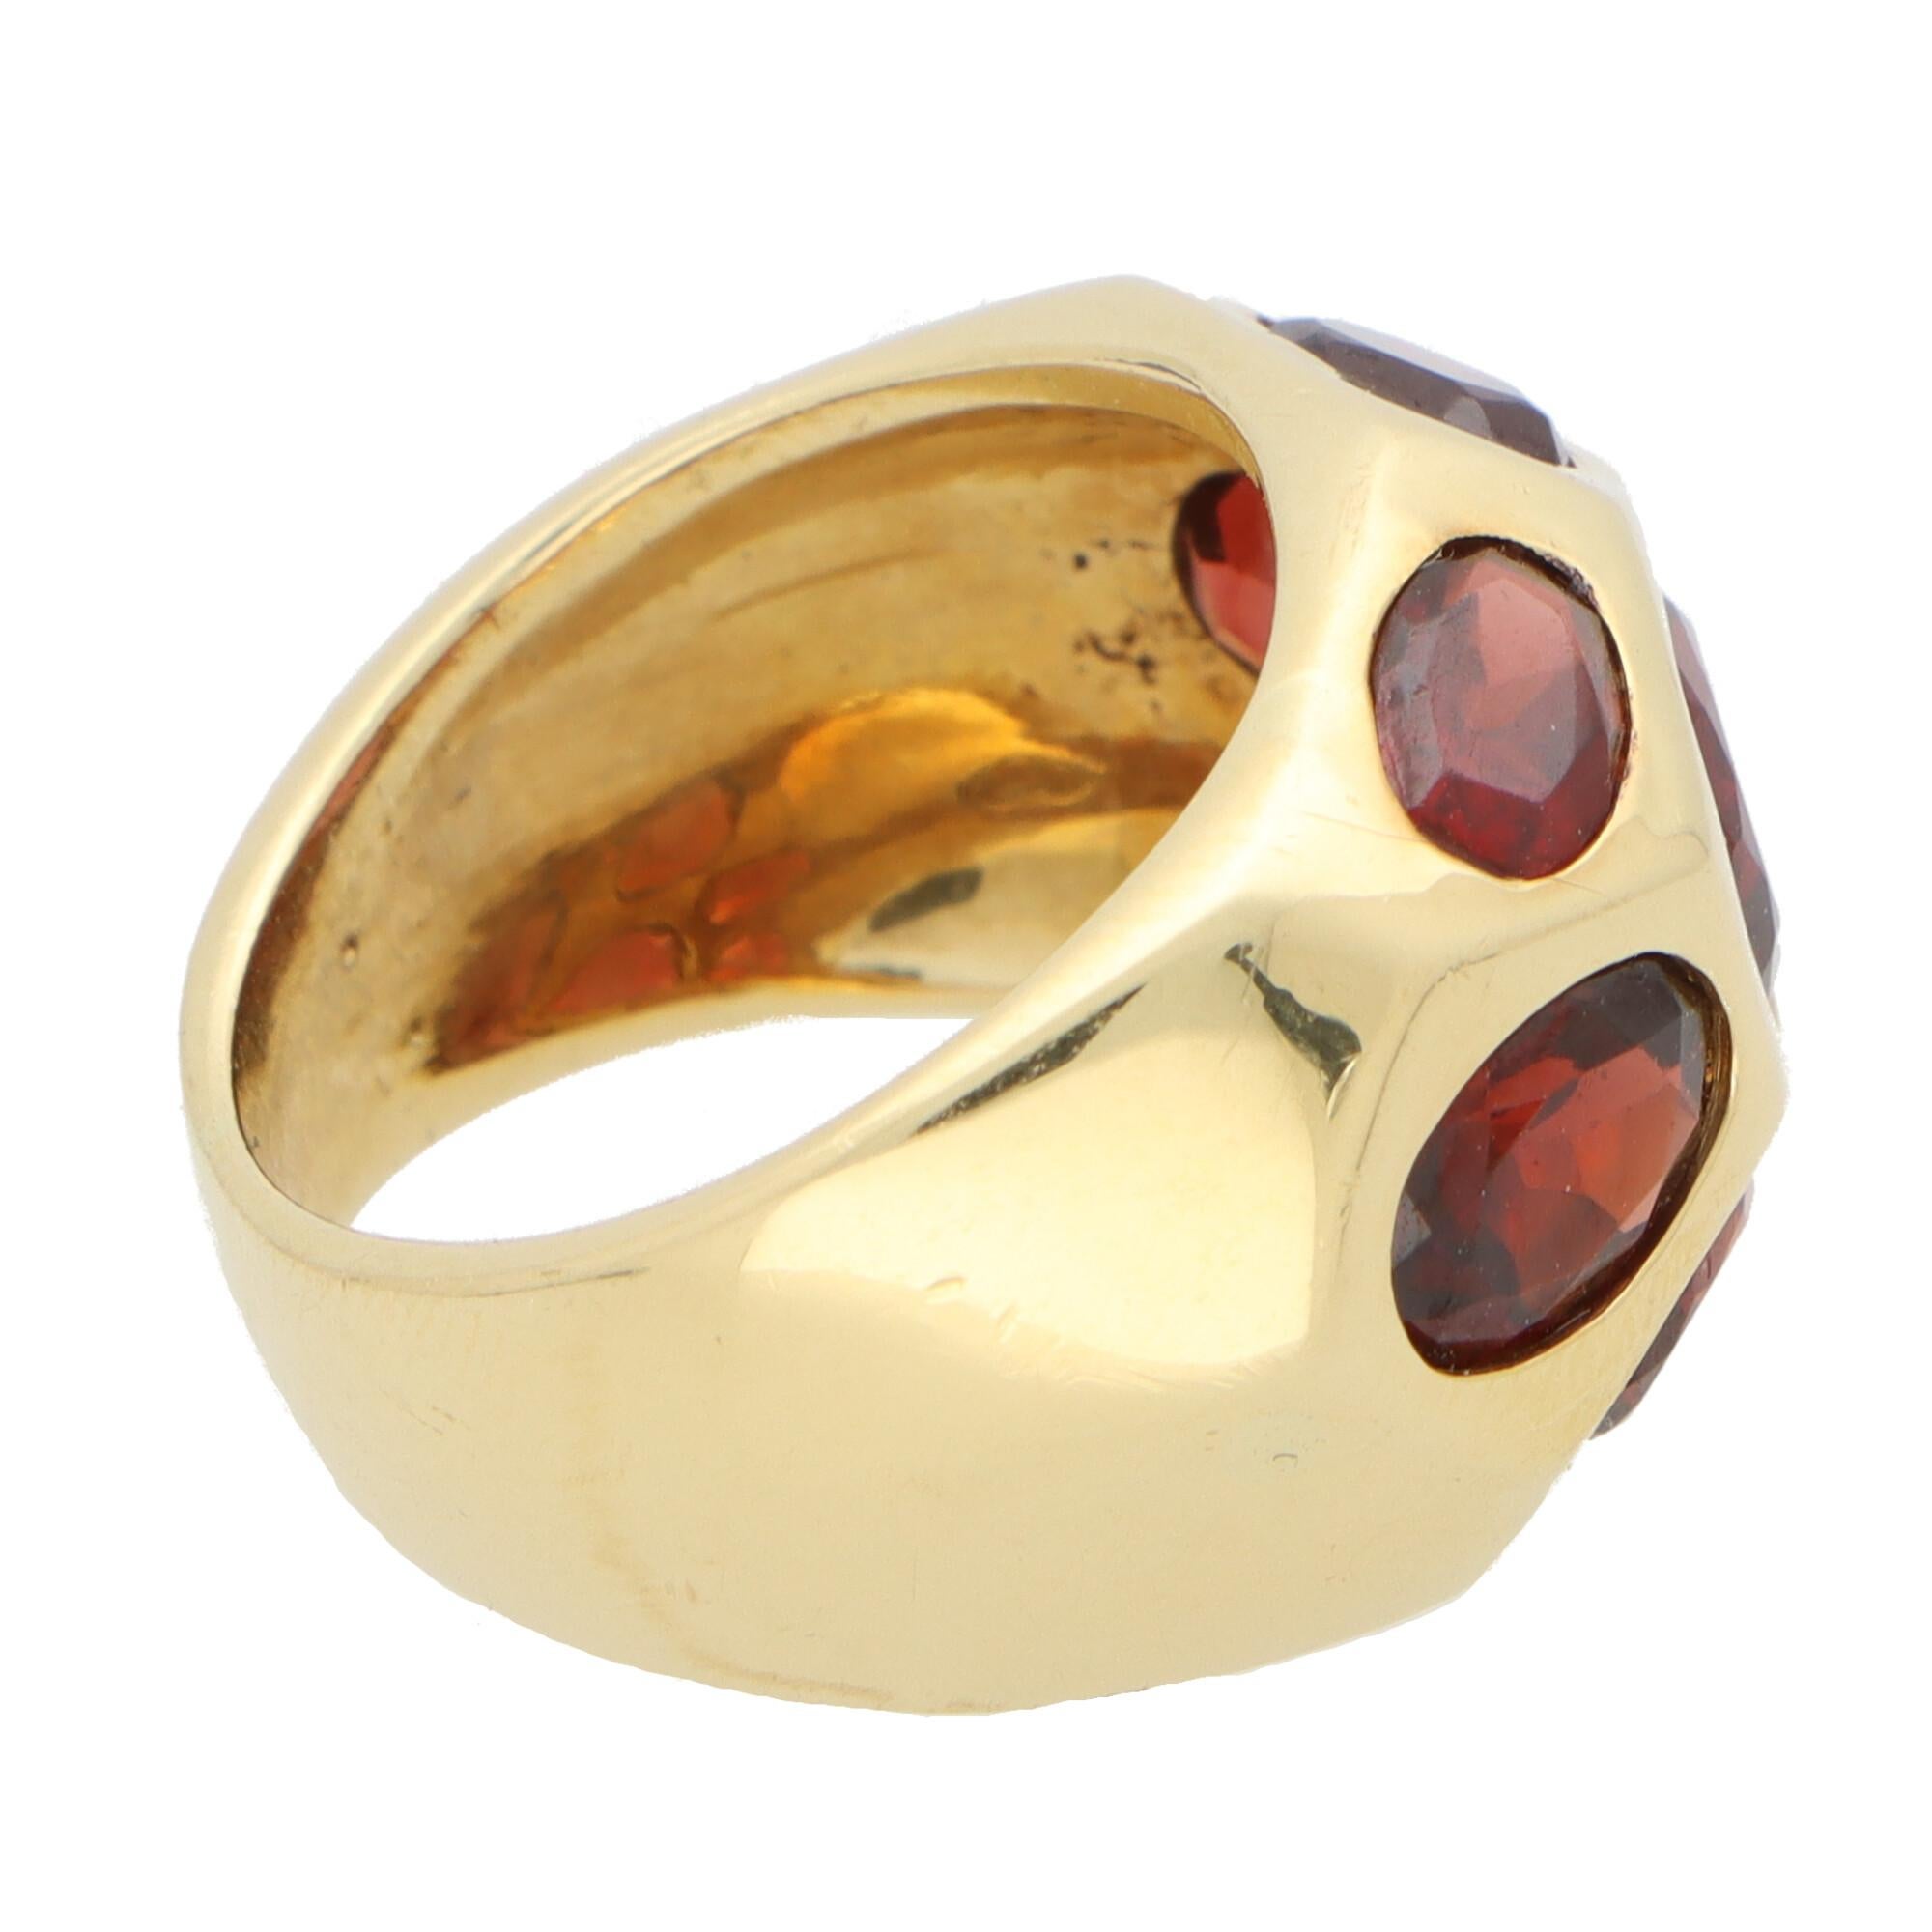 Vintage Red Almandine Garnet Bombe Ring Set in 18k Yellow Gold In Excellent Condition For Sale In London, GB